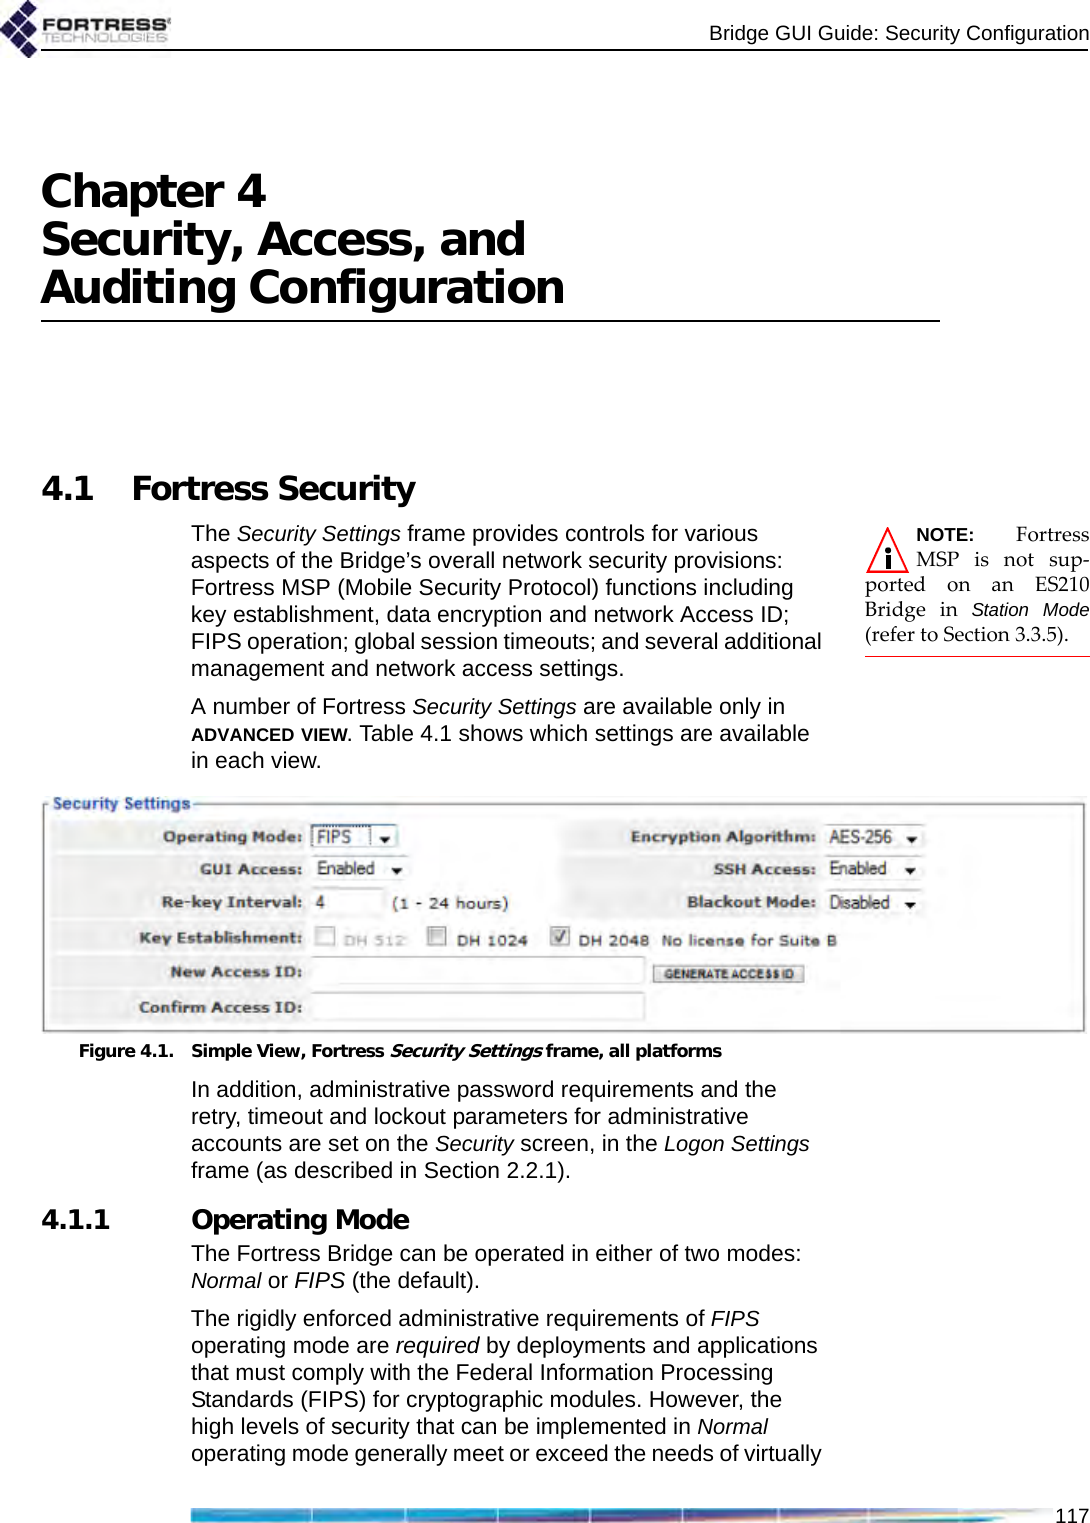 Bridge GUI Guide: Security Configuration117Chapter 4Security, Access, and Auditing Configuration4.1 Fortress SecurityNOTE: FortressMSP is not sup-ported on an ES210Bridge in Station Mode(refer to Section 3.3.5).The Security Settings frame provides controls for various aspects of the Bridge’s overall network security provisions: Fortress MSP (Mobile Security Protocol) functions including key establishment, data encryption and network Access ID; FIPS operation; global session timeouts; and several additional management and network access settings.A number of Fortress Security Settings are available only in ADVANCED VIEW. Table 4.1 shows which settings are available in each view.Figure 4.1. Simple View, Fortress Security Settings frame, all platforms In addition, administrative password requirements and the retry, timeout and lockout parameters for administrative accounts are set on the Security screen, in the Logon Settings frame (as described in Section 2.2.1).4.1.1 Operating ModeThe Fortress Bridge can be operated in either of two modes: Normal or FIPS (the default).The rigidly enforced administrative requirements of FIPS operating mode are required by deployments and applications that must comply with the Federal Information Processing Standards (FIPS) for cryptographic modules. However, the high levels of security that can be implemented in Normal operating mode generally meet or exceed the needs of virtually 